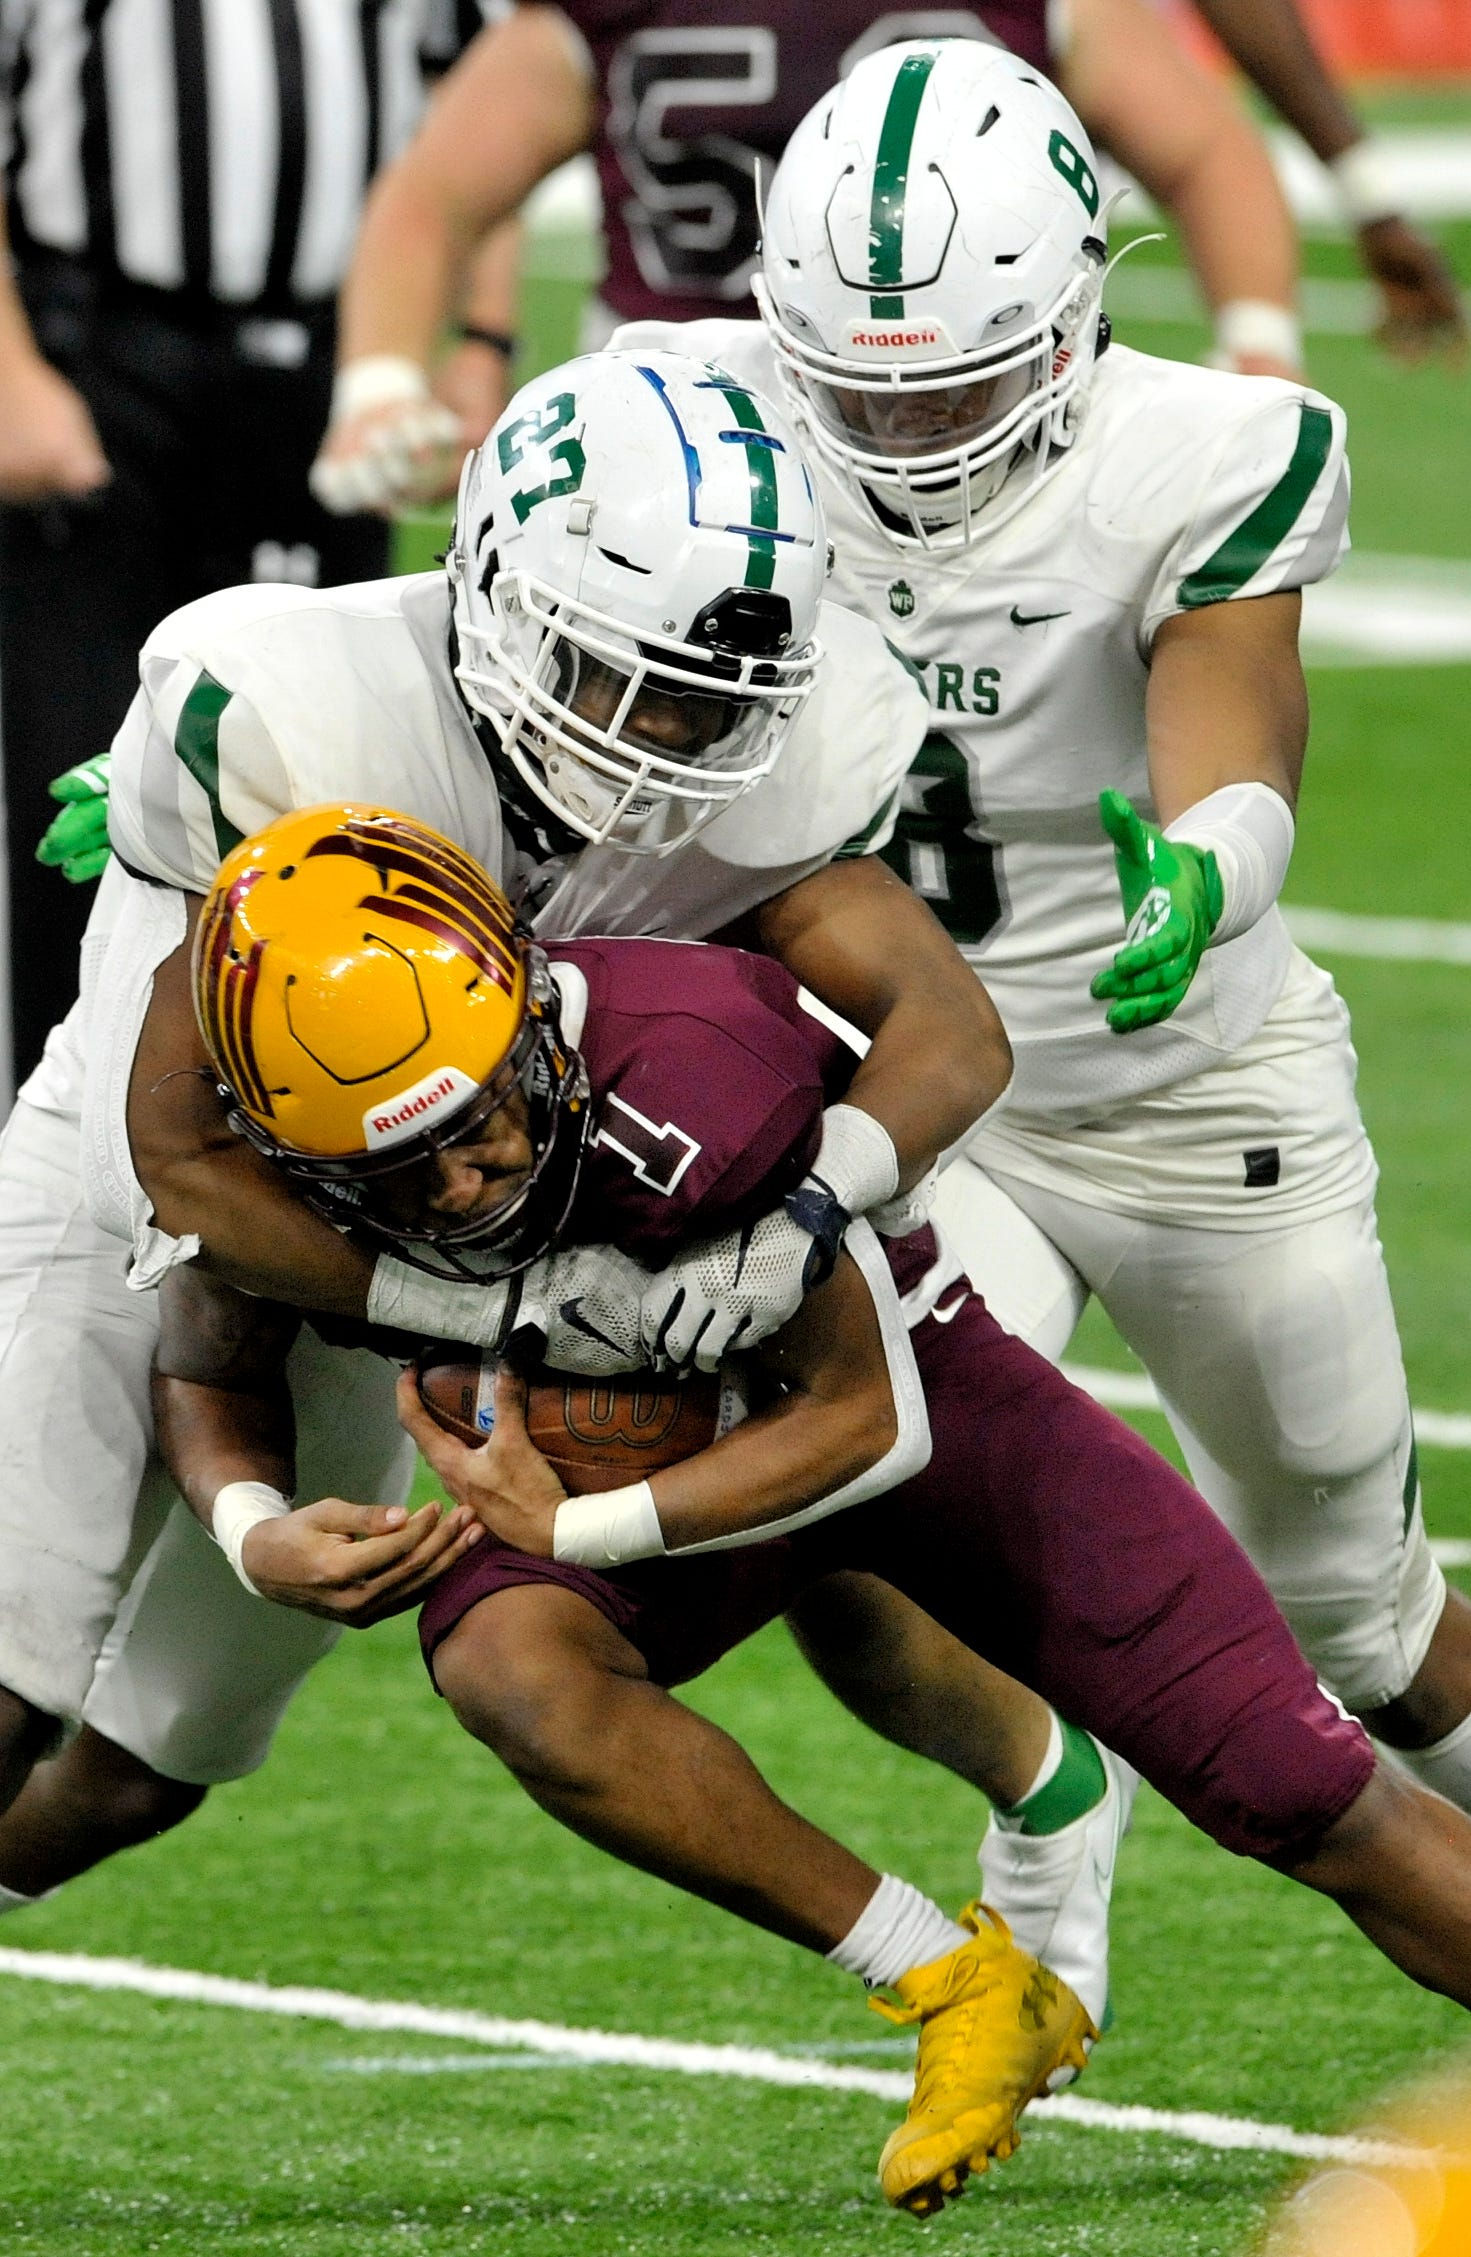 Davison Dion Brown Jr. (1) keeps the ball as he rushes for a first down in the third quarter while being tackled by West Bloomfield's Kyle Johnson (27) and Chris Johnson.